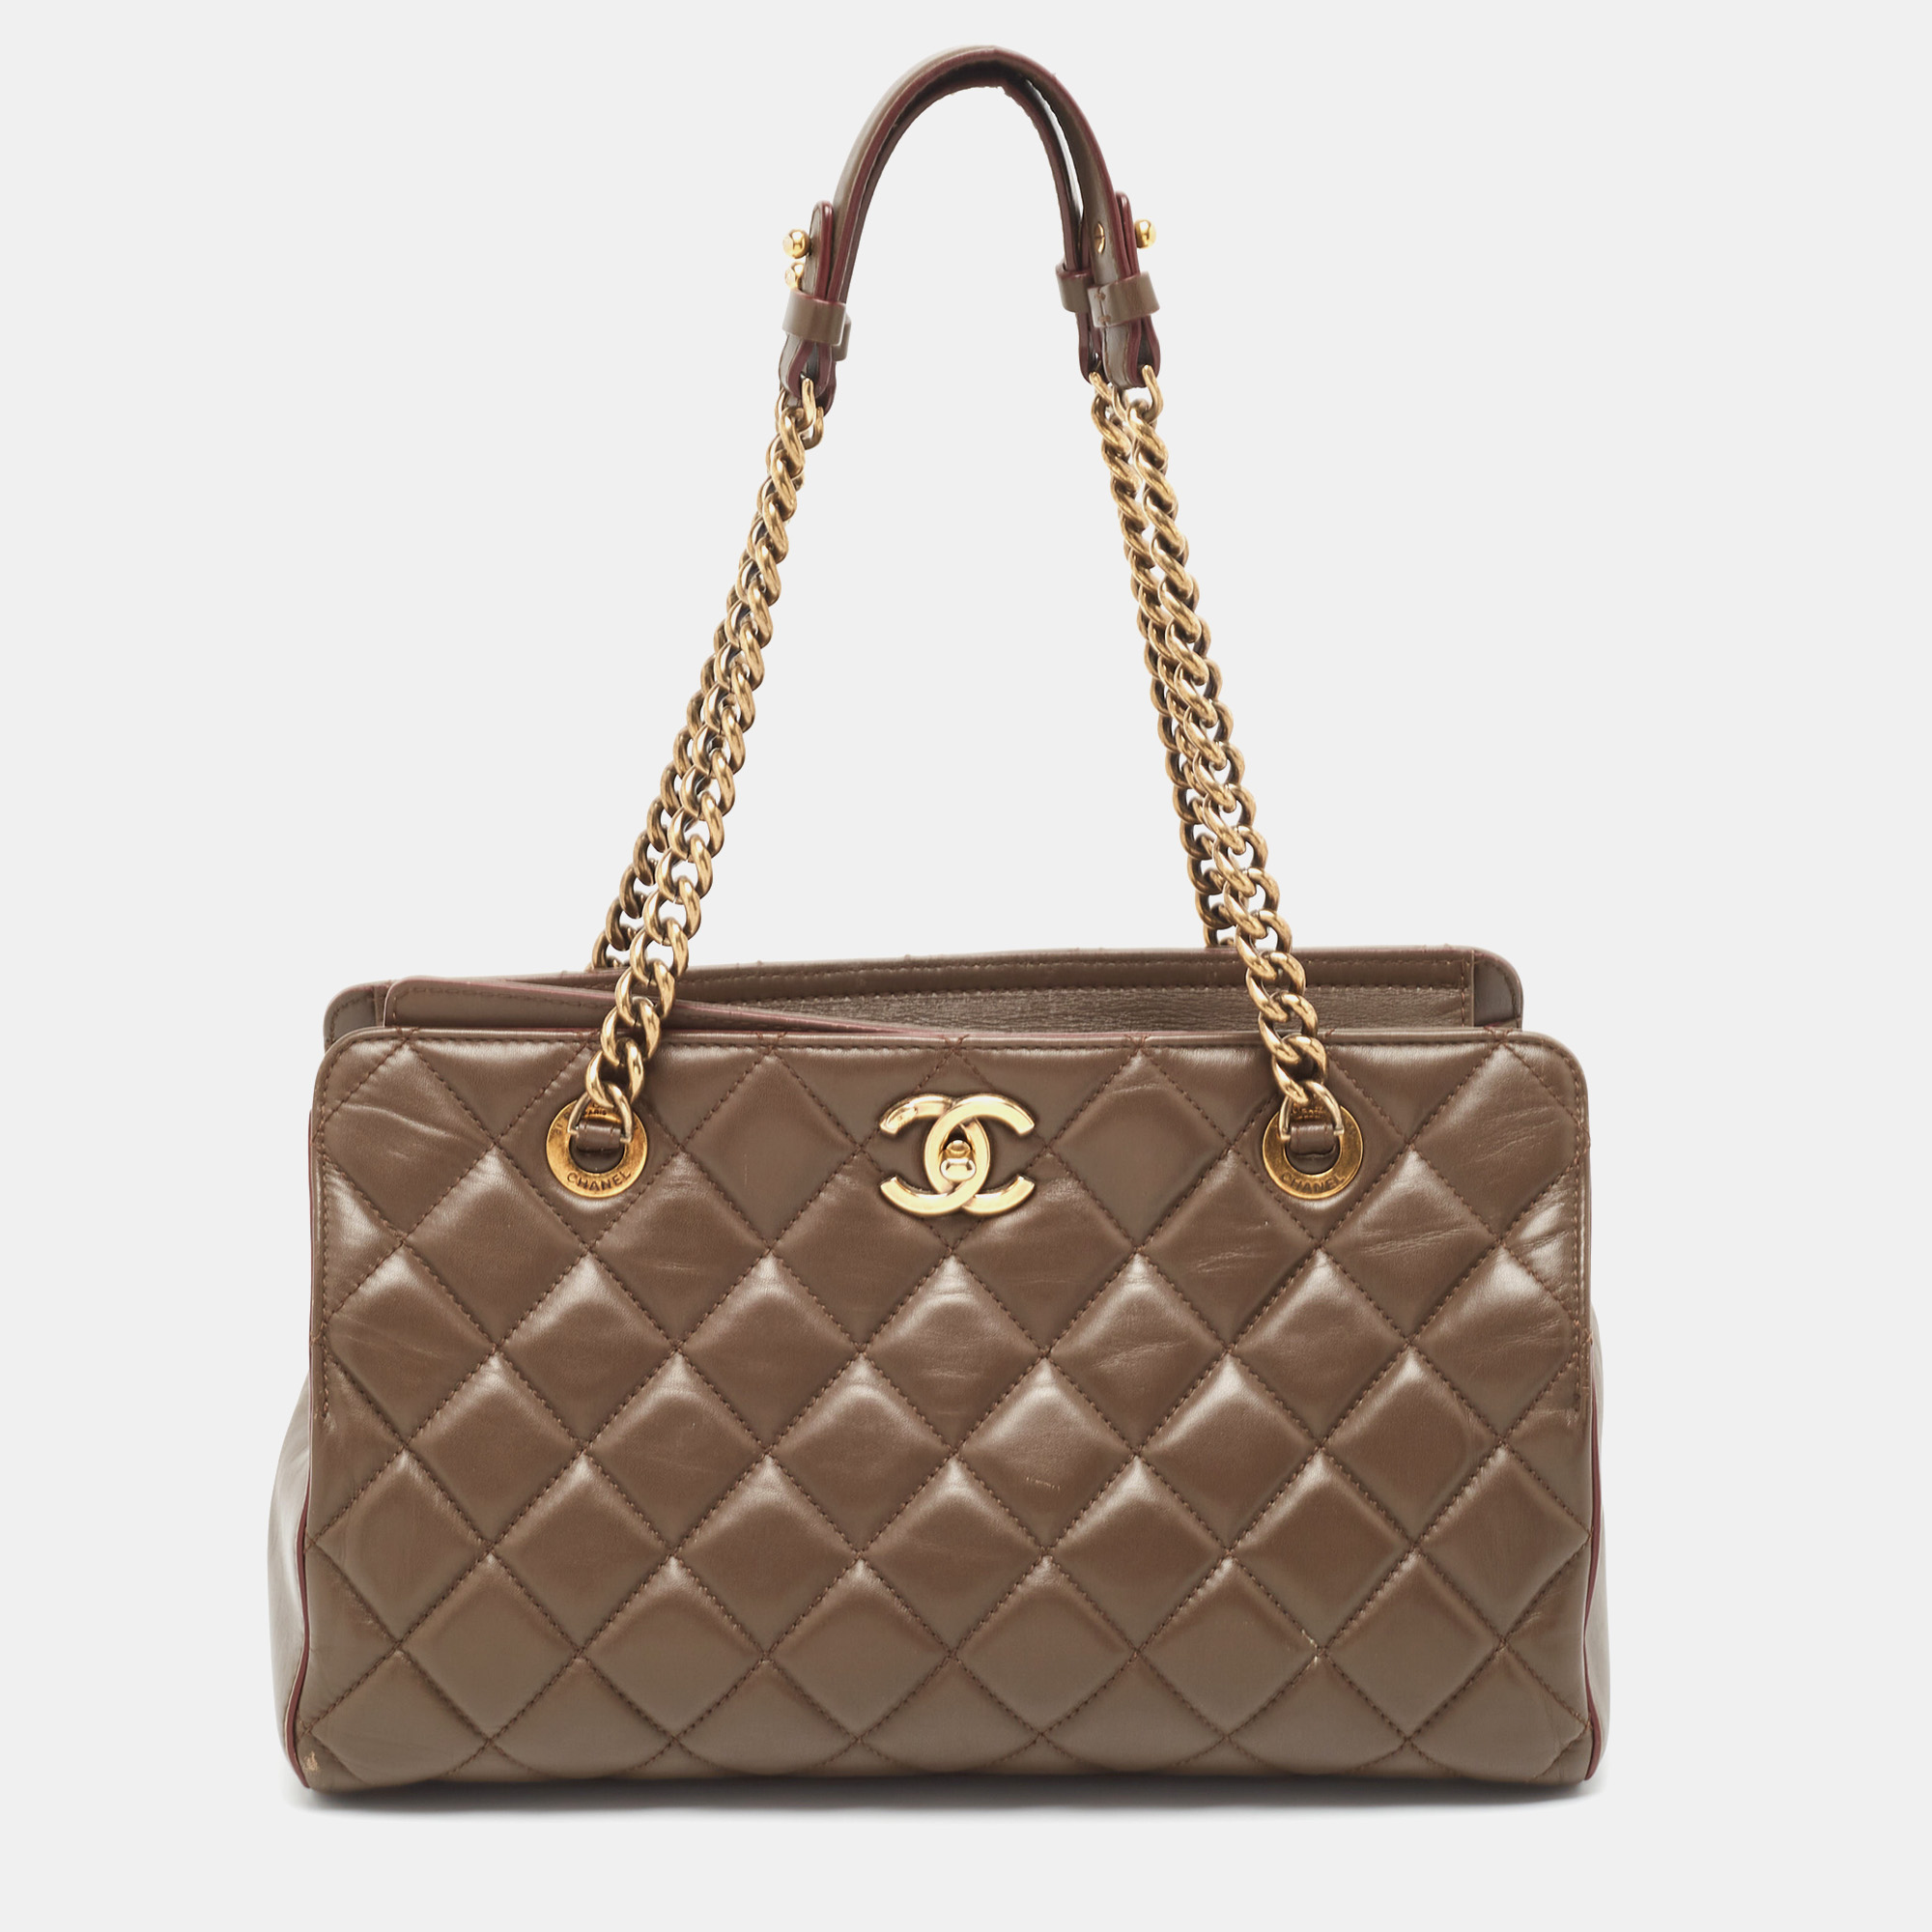 Chanel Dark Brown Quilted Leather Perfect Edge Tote